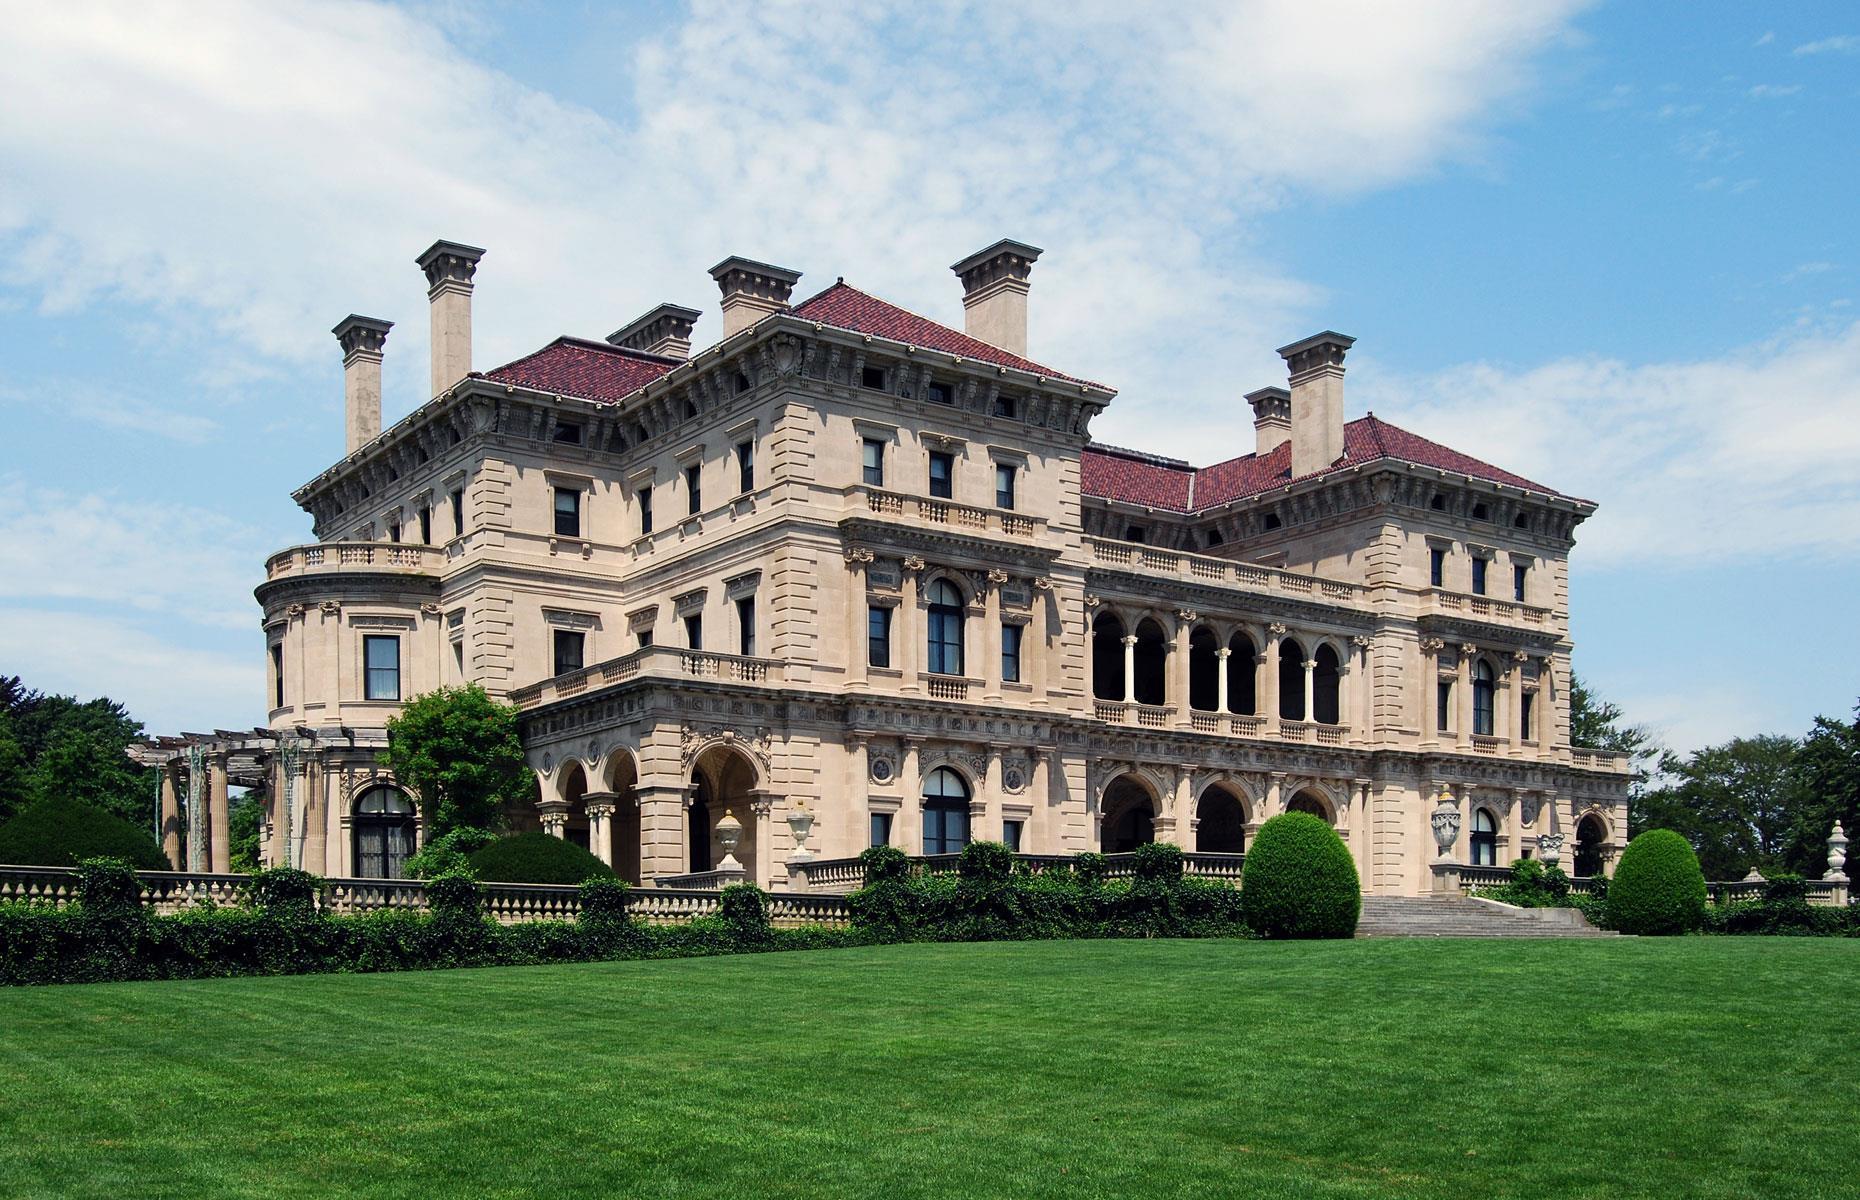 <p>Despite its 130 rooms – including an enormous ballroom and Louis XV and Louis XVI-style salons – Cornelius and Alice were not satisfied with their expanded New York home and decided to chase the city’s elite out to Newport, Rhode Island where they purchased The Breakers for roughly $15 million (£11.9m) in today's money.</p>  <p>Unfortunately for the couple, the Queen Anne-style summer “cottage” burned down in 1892, necessitating a complete rebuild, but creating yet another opportunity for opulent construction.</p>